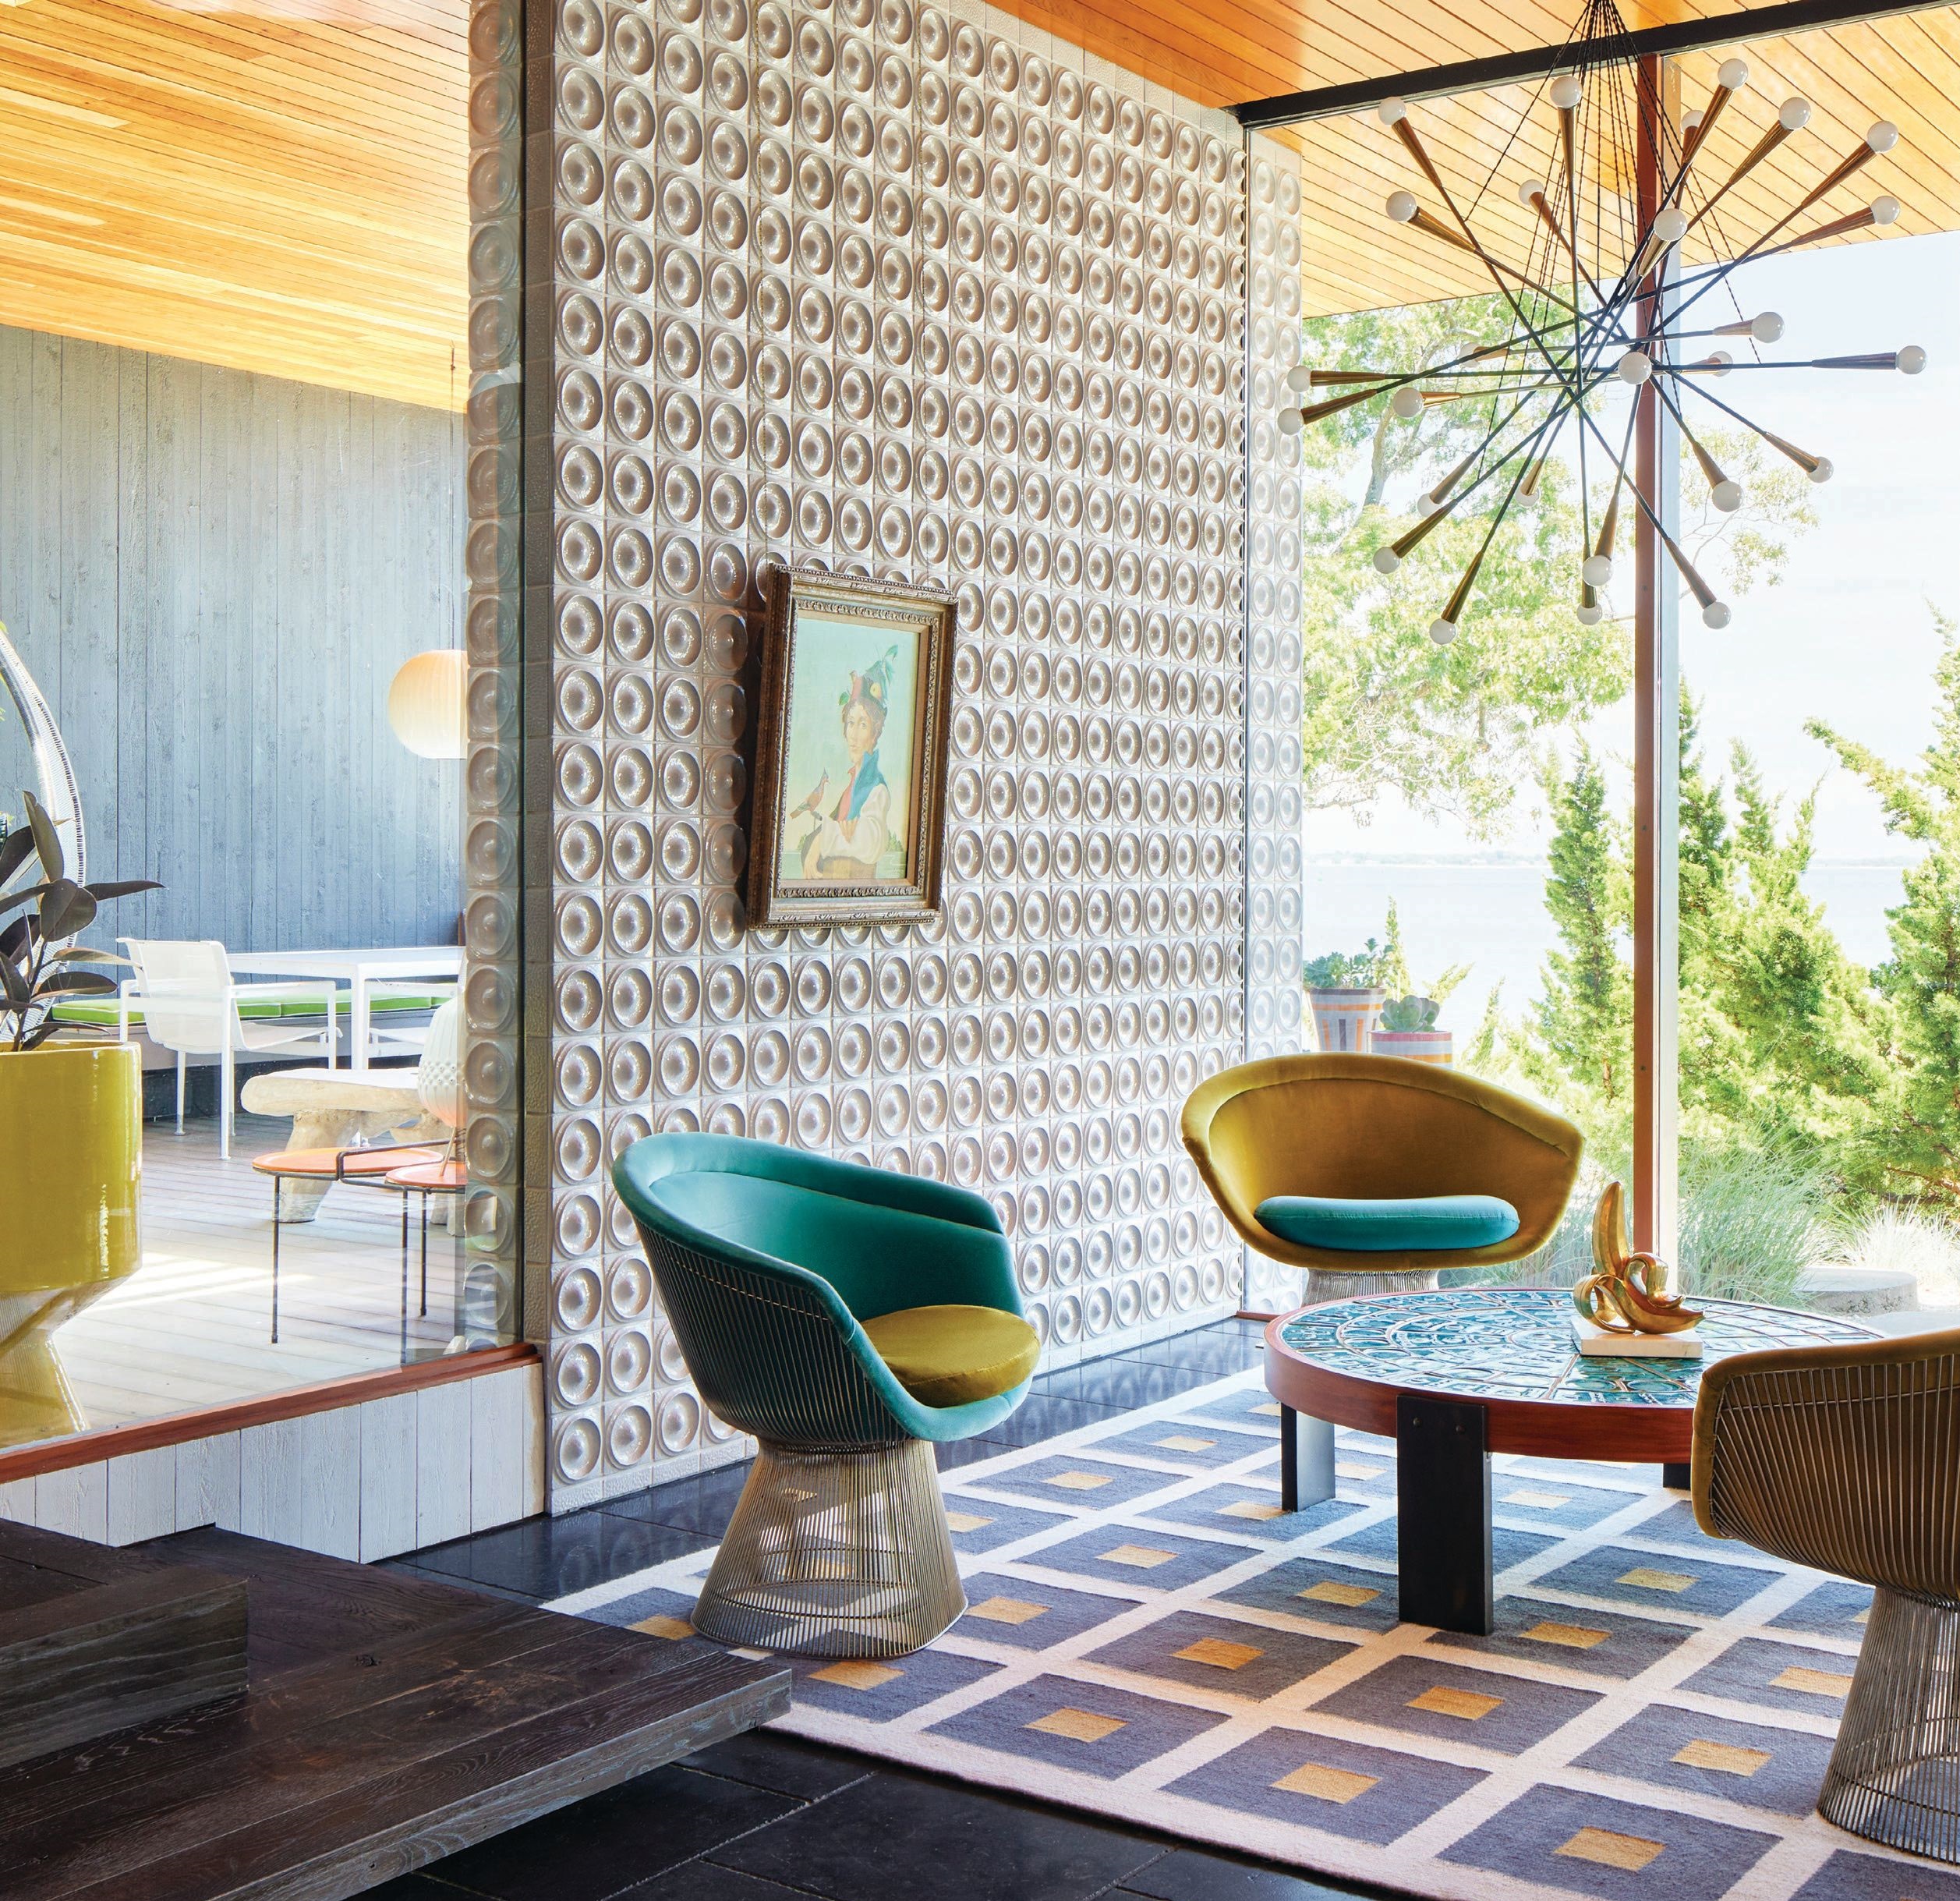 Tiles custom designed by Adler and art by Jean-Pierre Clement offer a counterpoint to vintage Platner chairs in a velvet by Kravet over a Jonathan Adler Peter reversible Peruvian flat-weave rug. PHOTOGRAPHED BY GIEVES ANDERSON